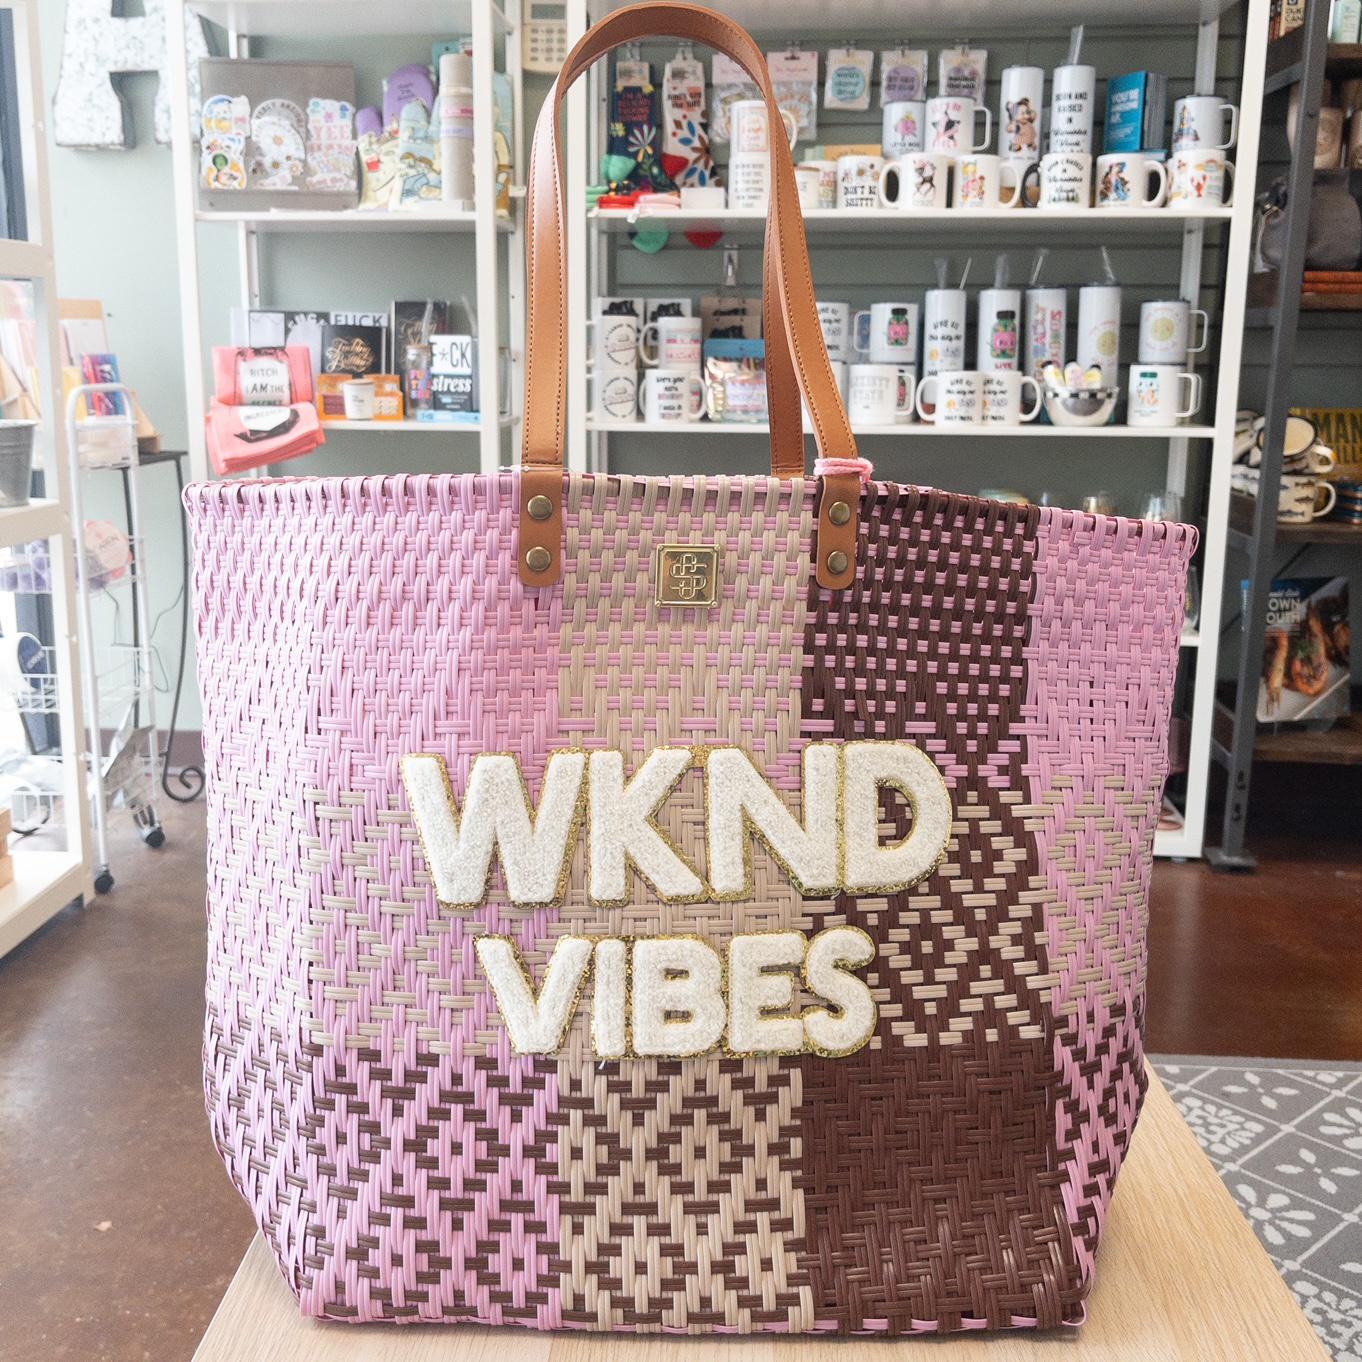 WKND VIBES Tote